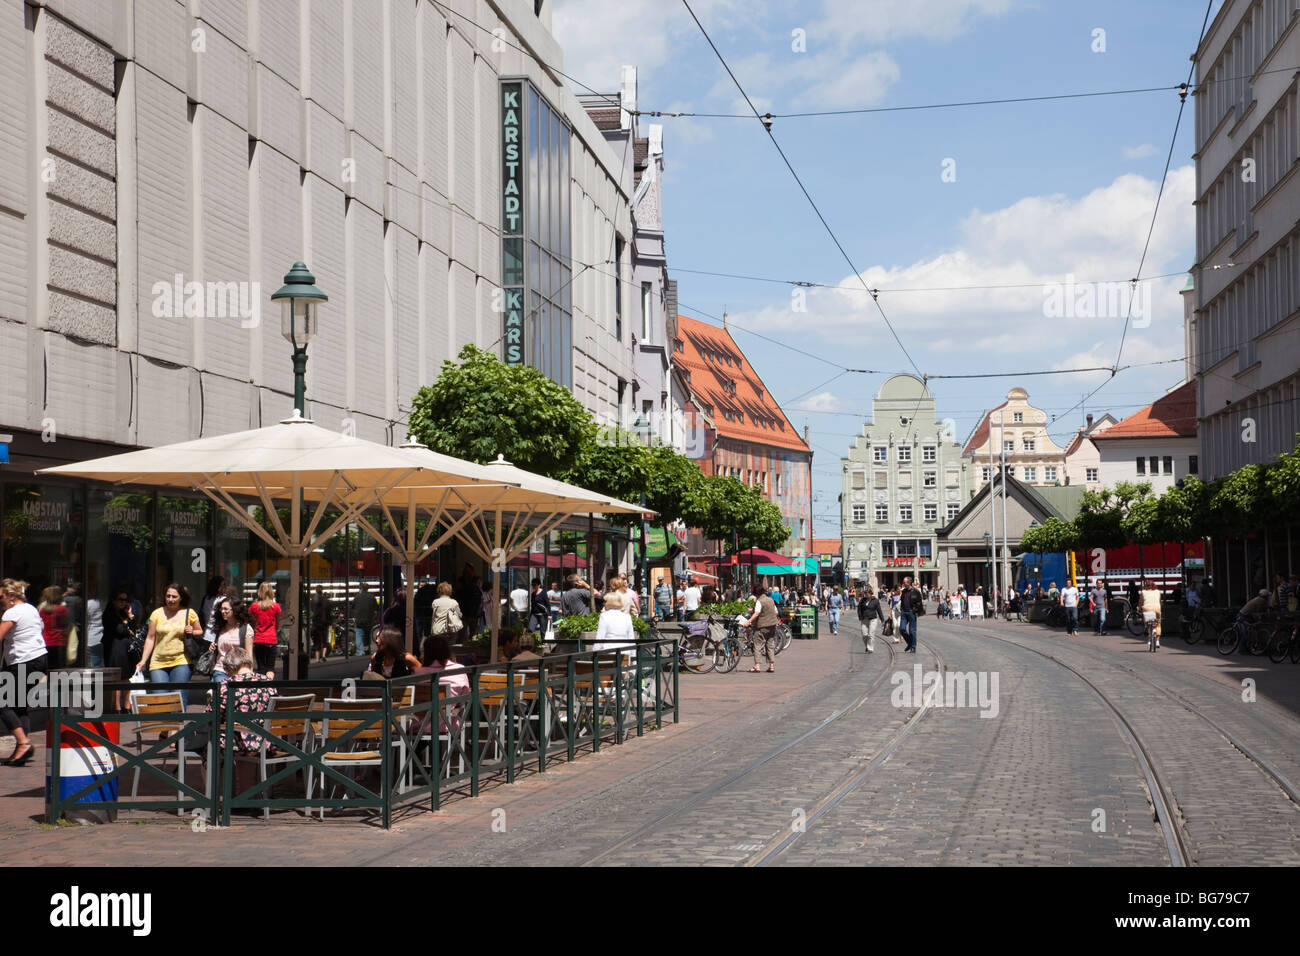 Moritzplatz, Augsburg, Bavaria, Germany, Europe. City centre street scene with people dining outside in pavement cafes Stock Photo